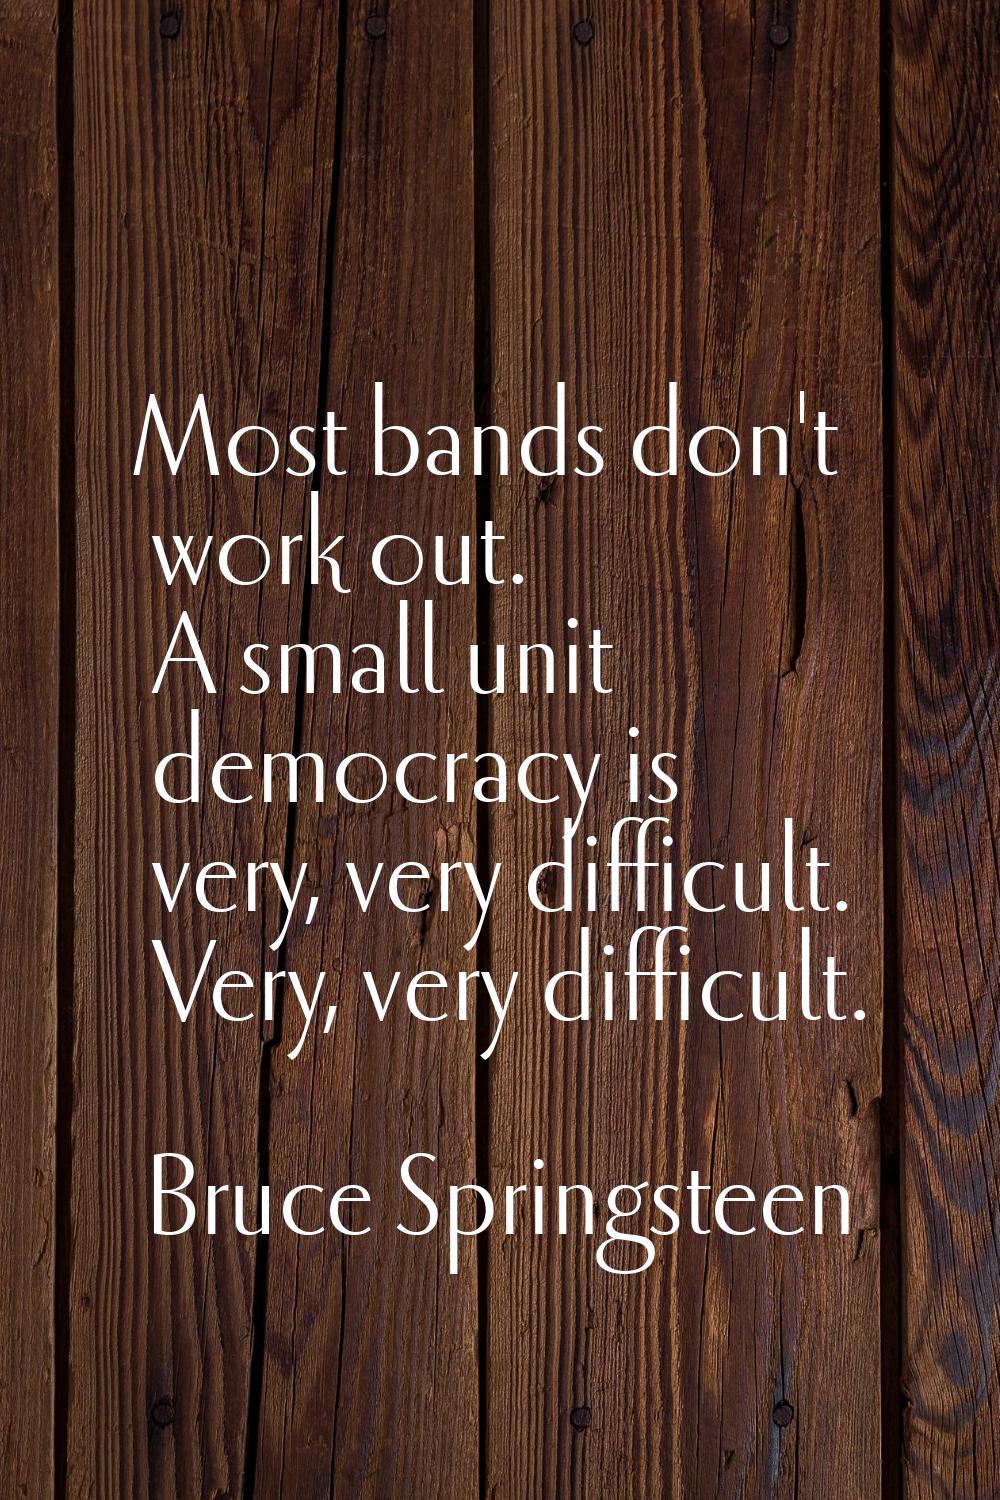 Most bands don't work out. A small unit democracy is very, very difficult. Very, very difficult.